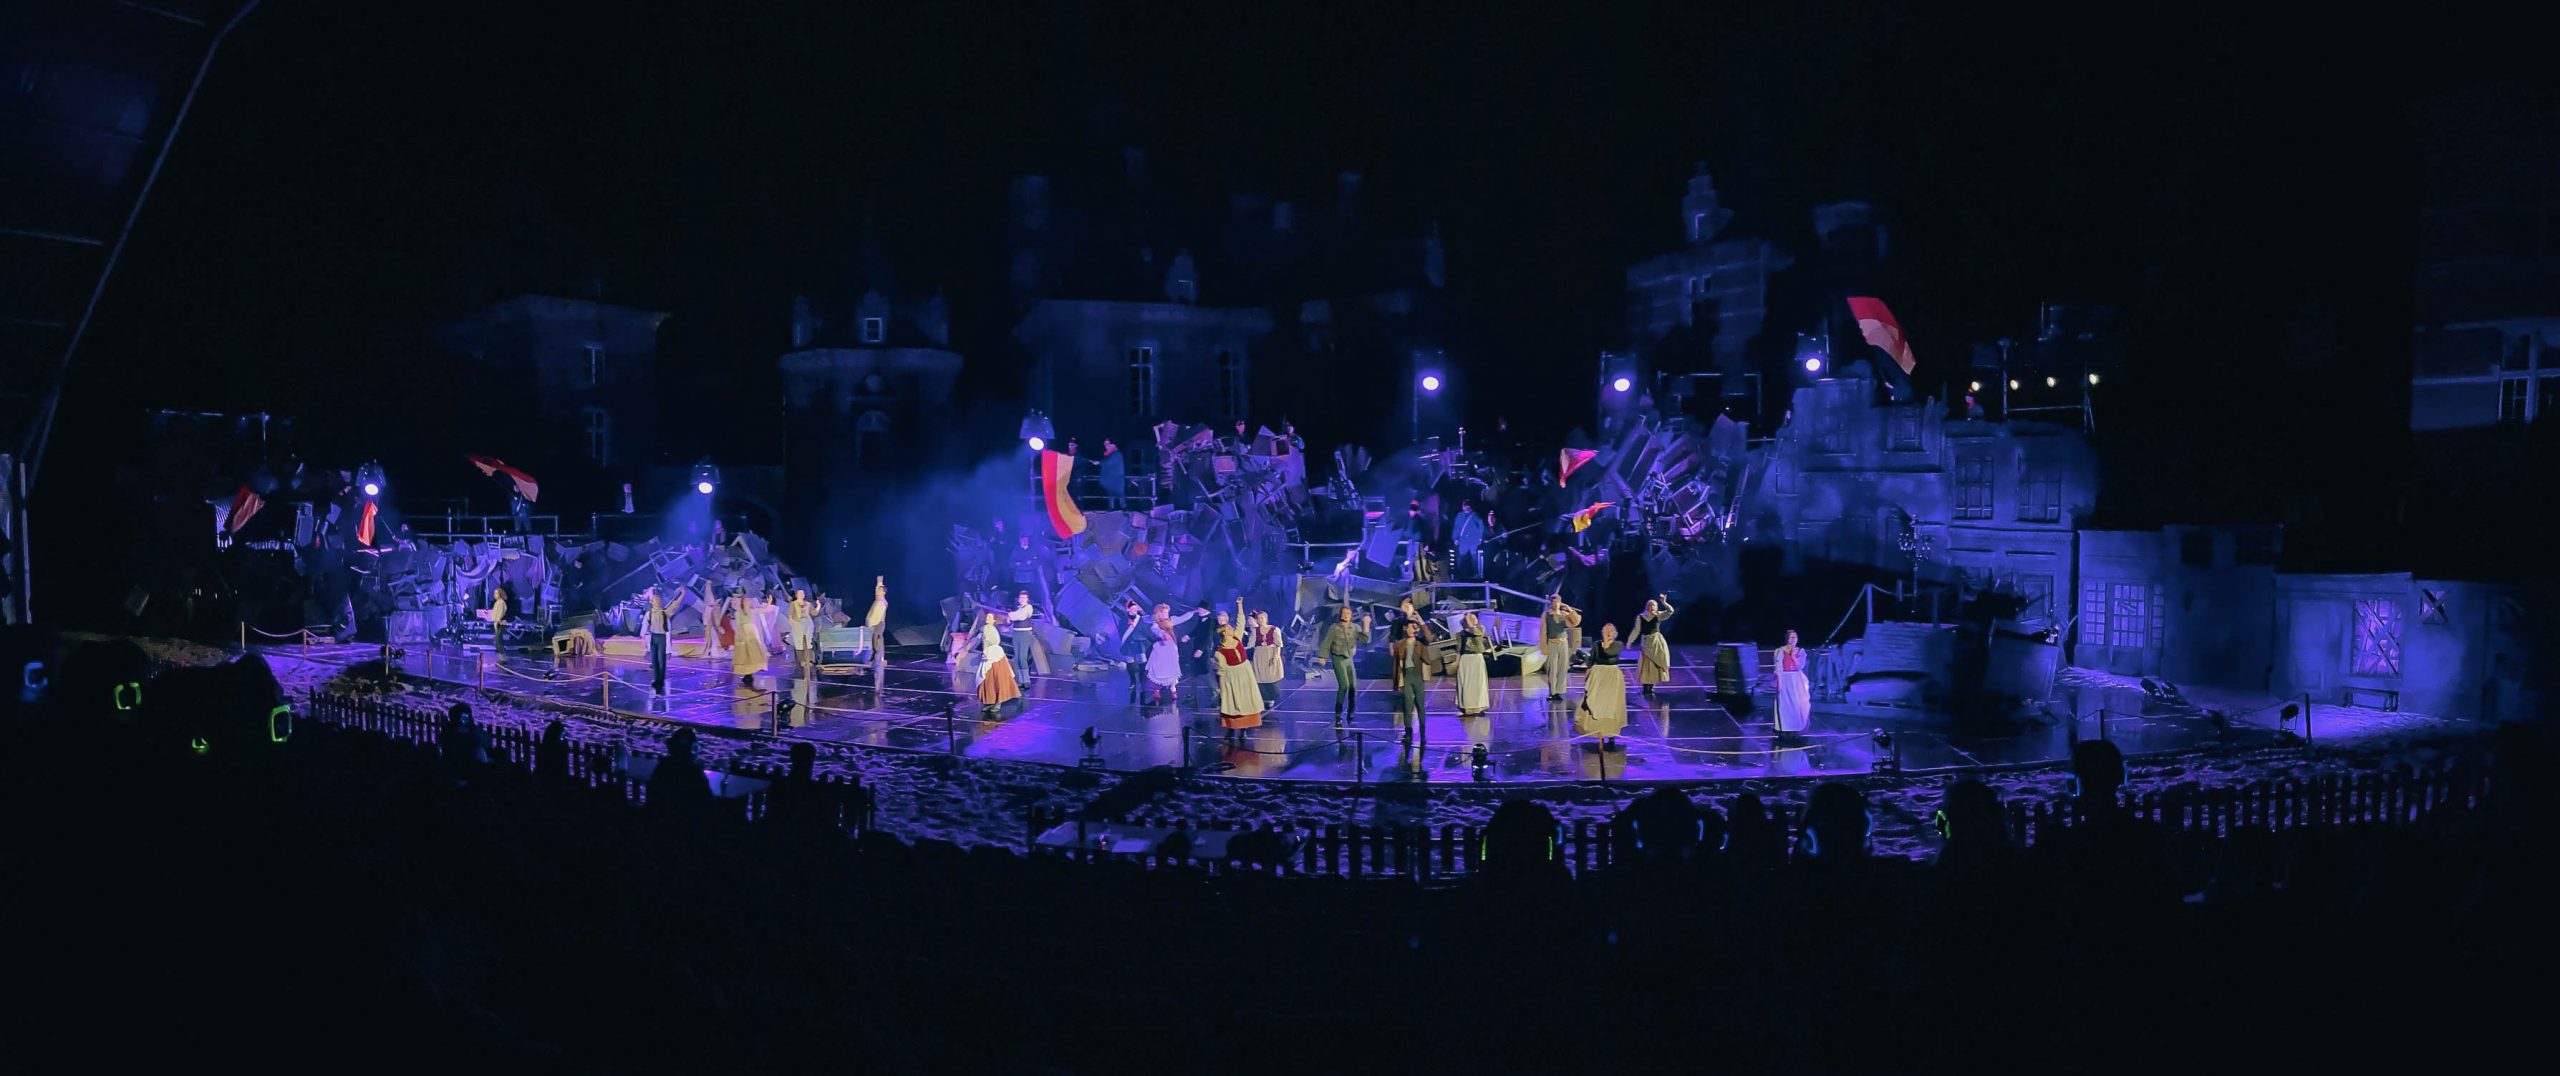 Impressive Musical '1830' On Castle Domain With dLive & Waves System Event Players 1